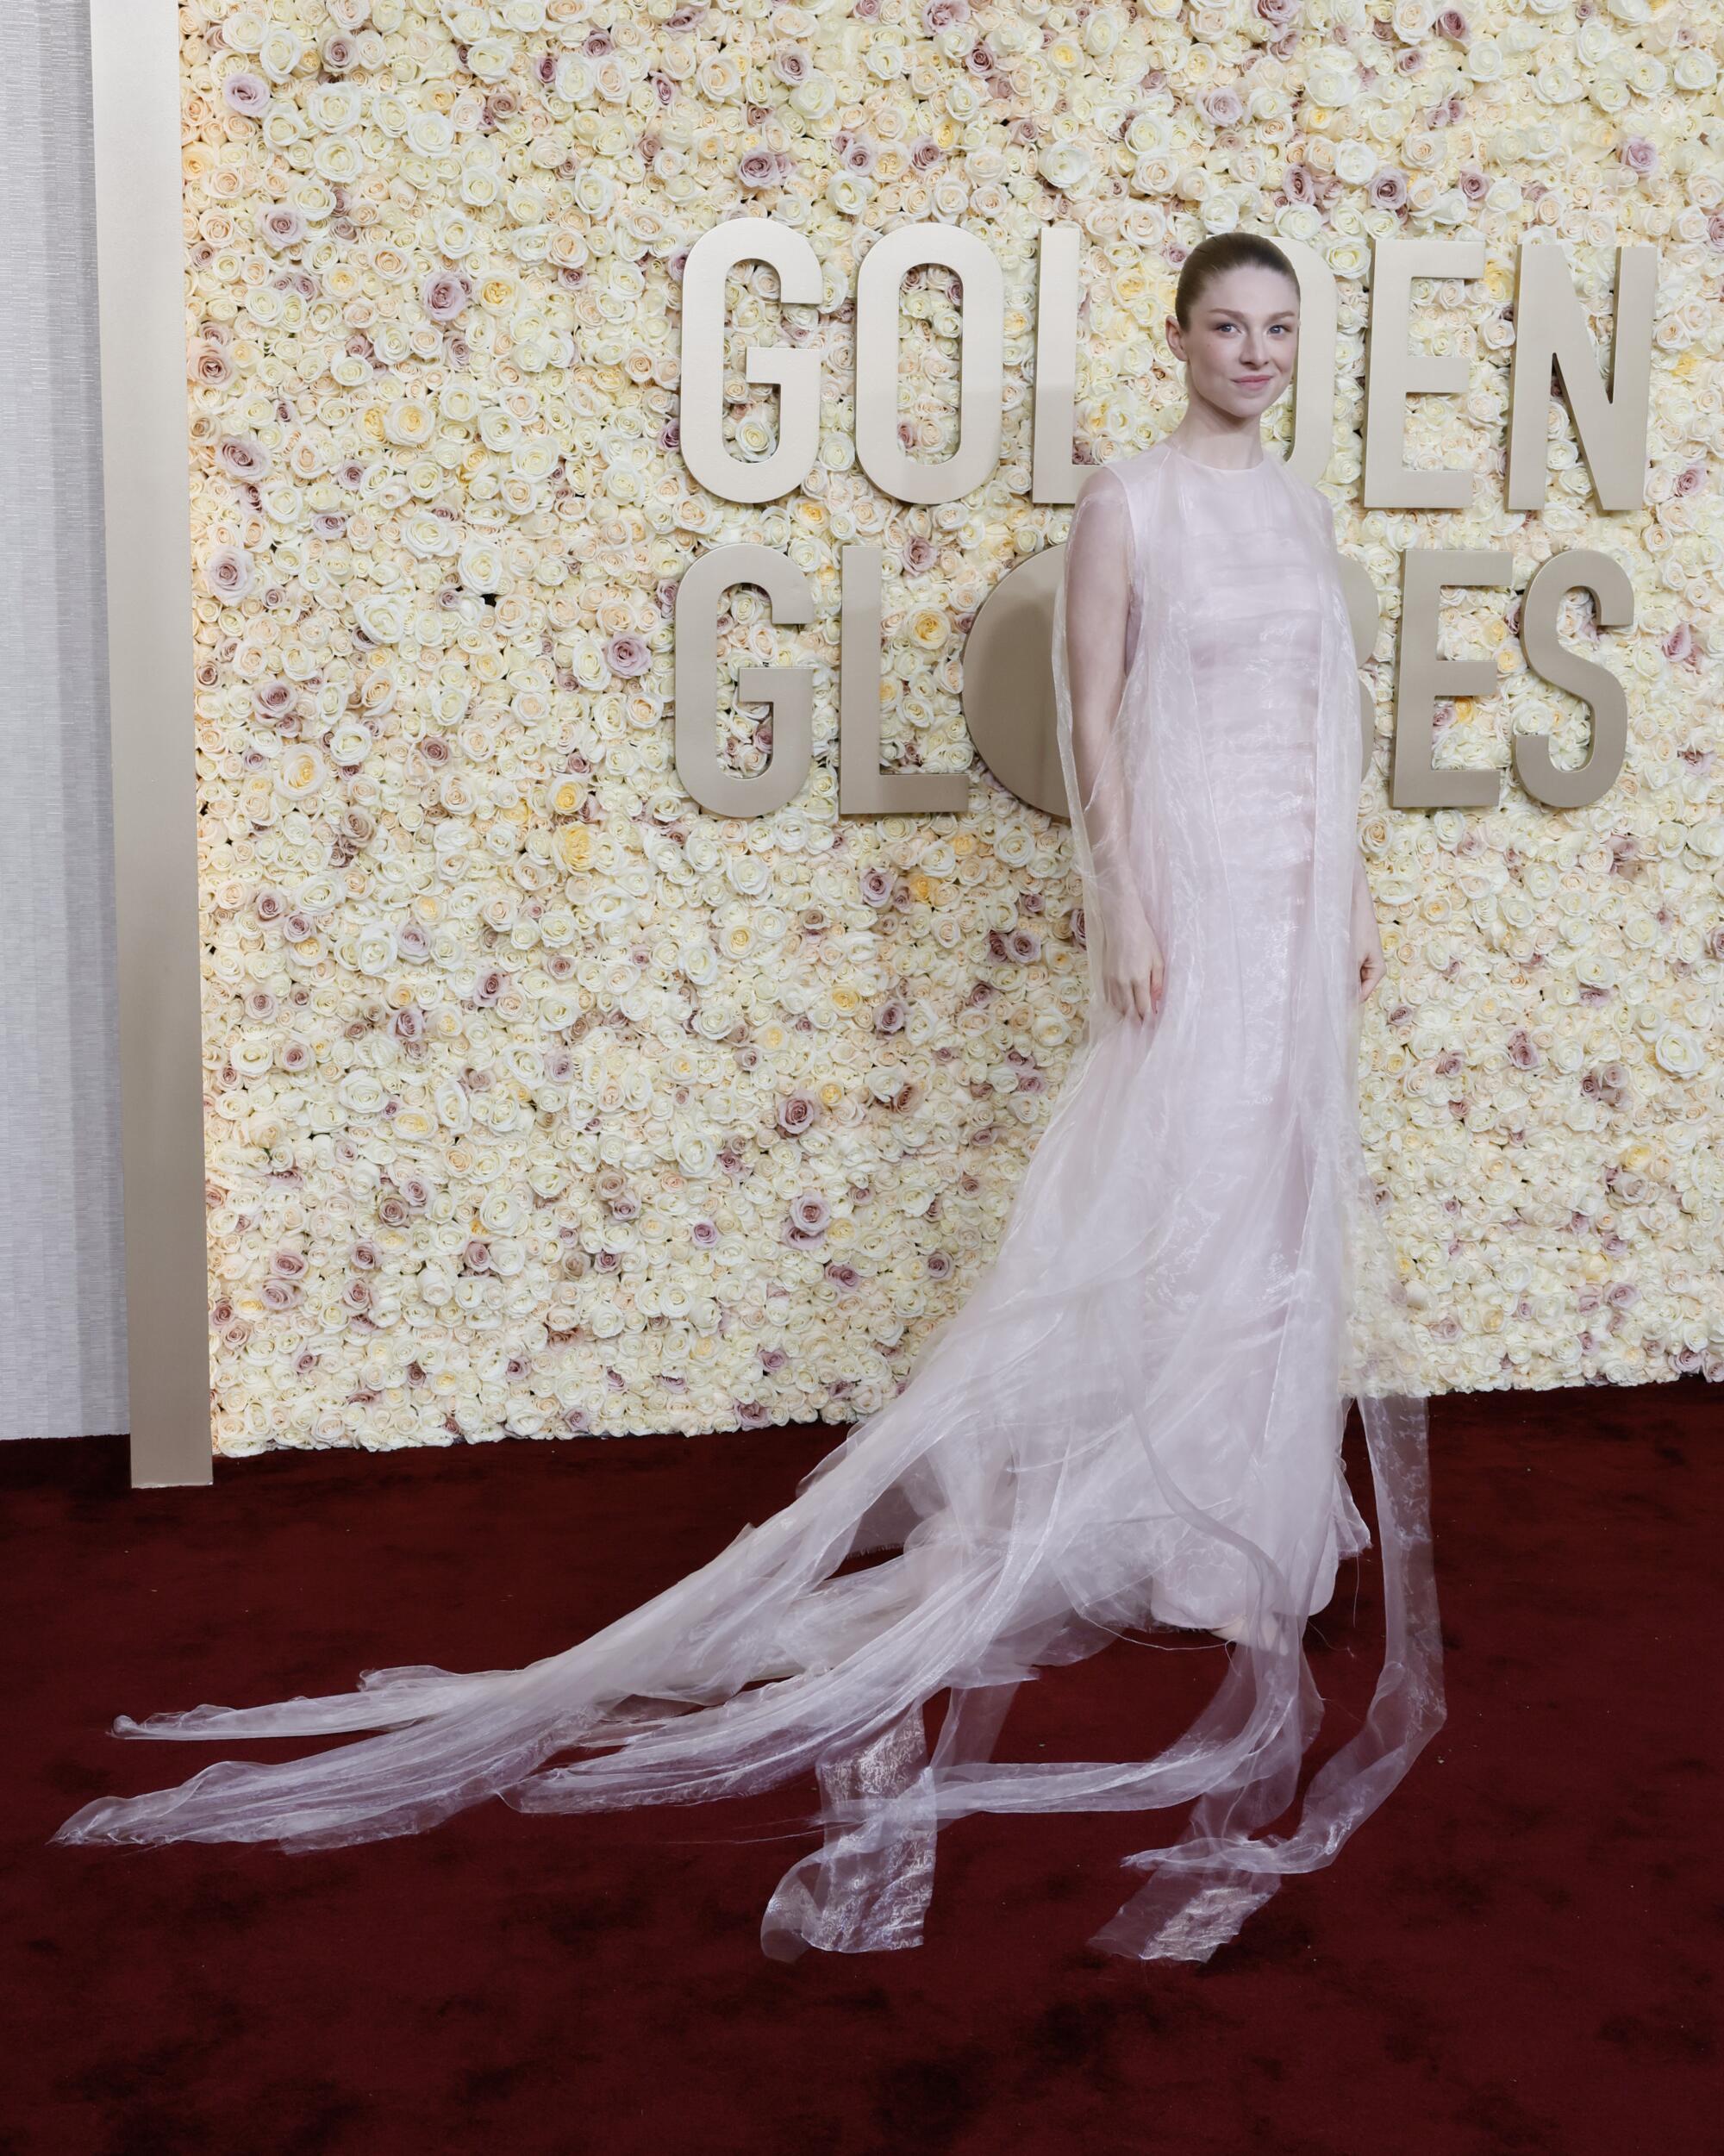 Hunter Schafer on the red carpet of the 81st Golden Globe Awards held at the Beverly Hilton